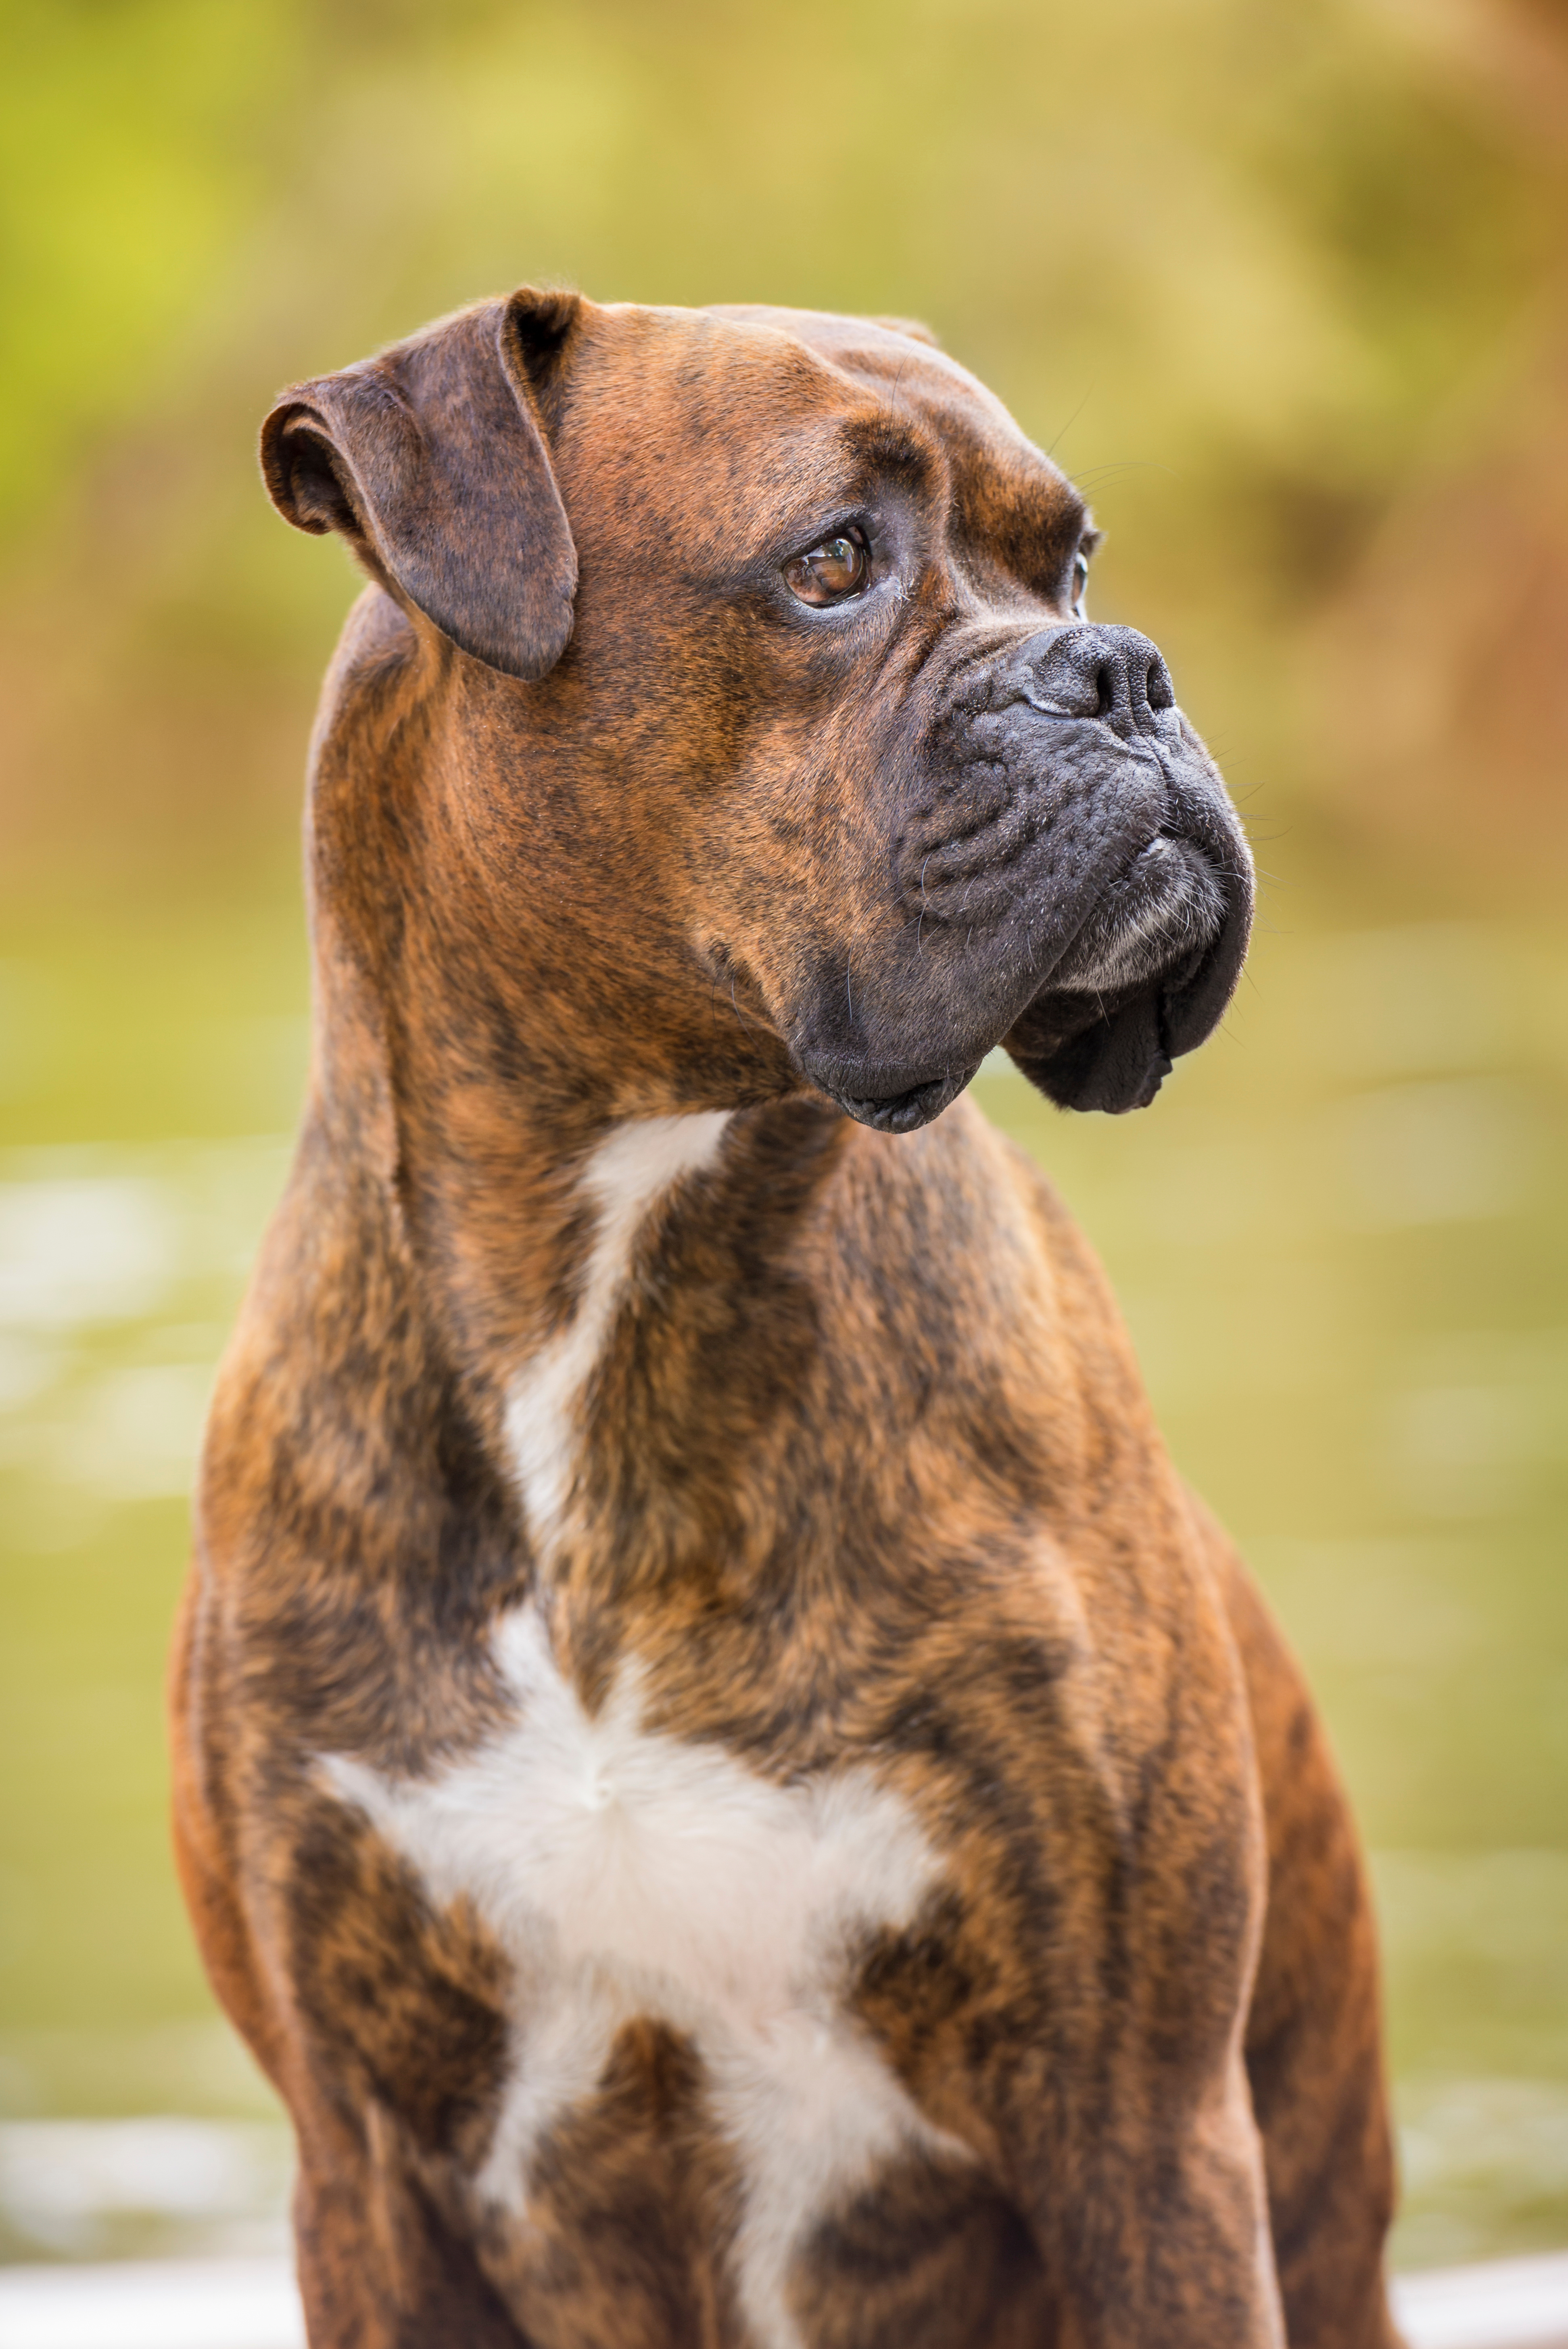 A trained boxer dog - Dog Training Elite in Las Vegas is the best choice for boxer dog training in Las Vegas, NV!